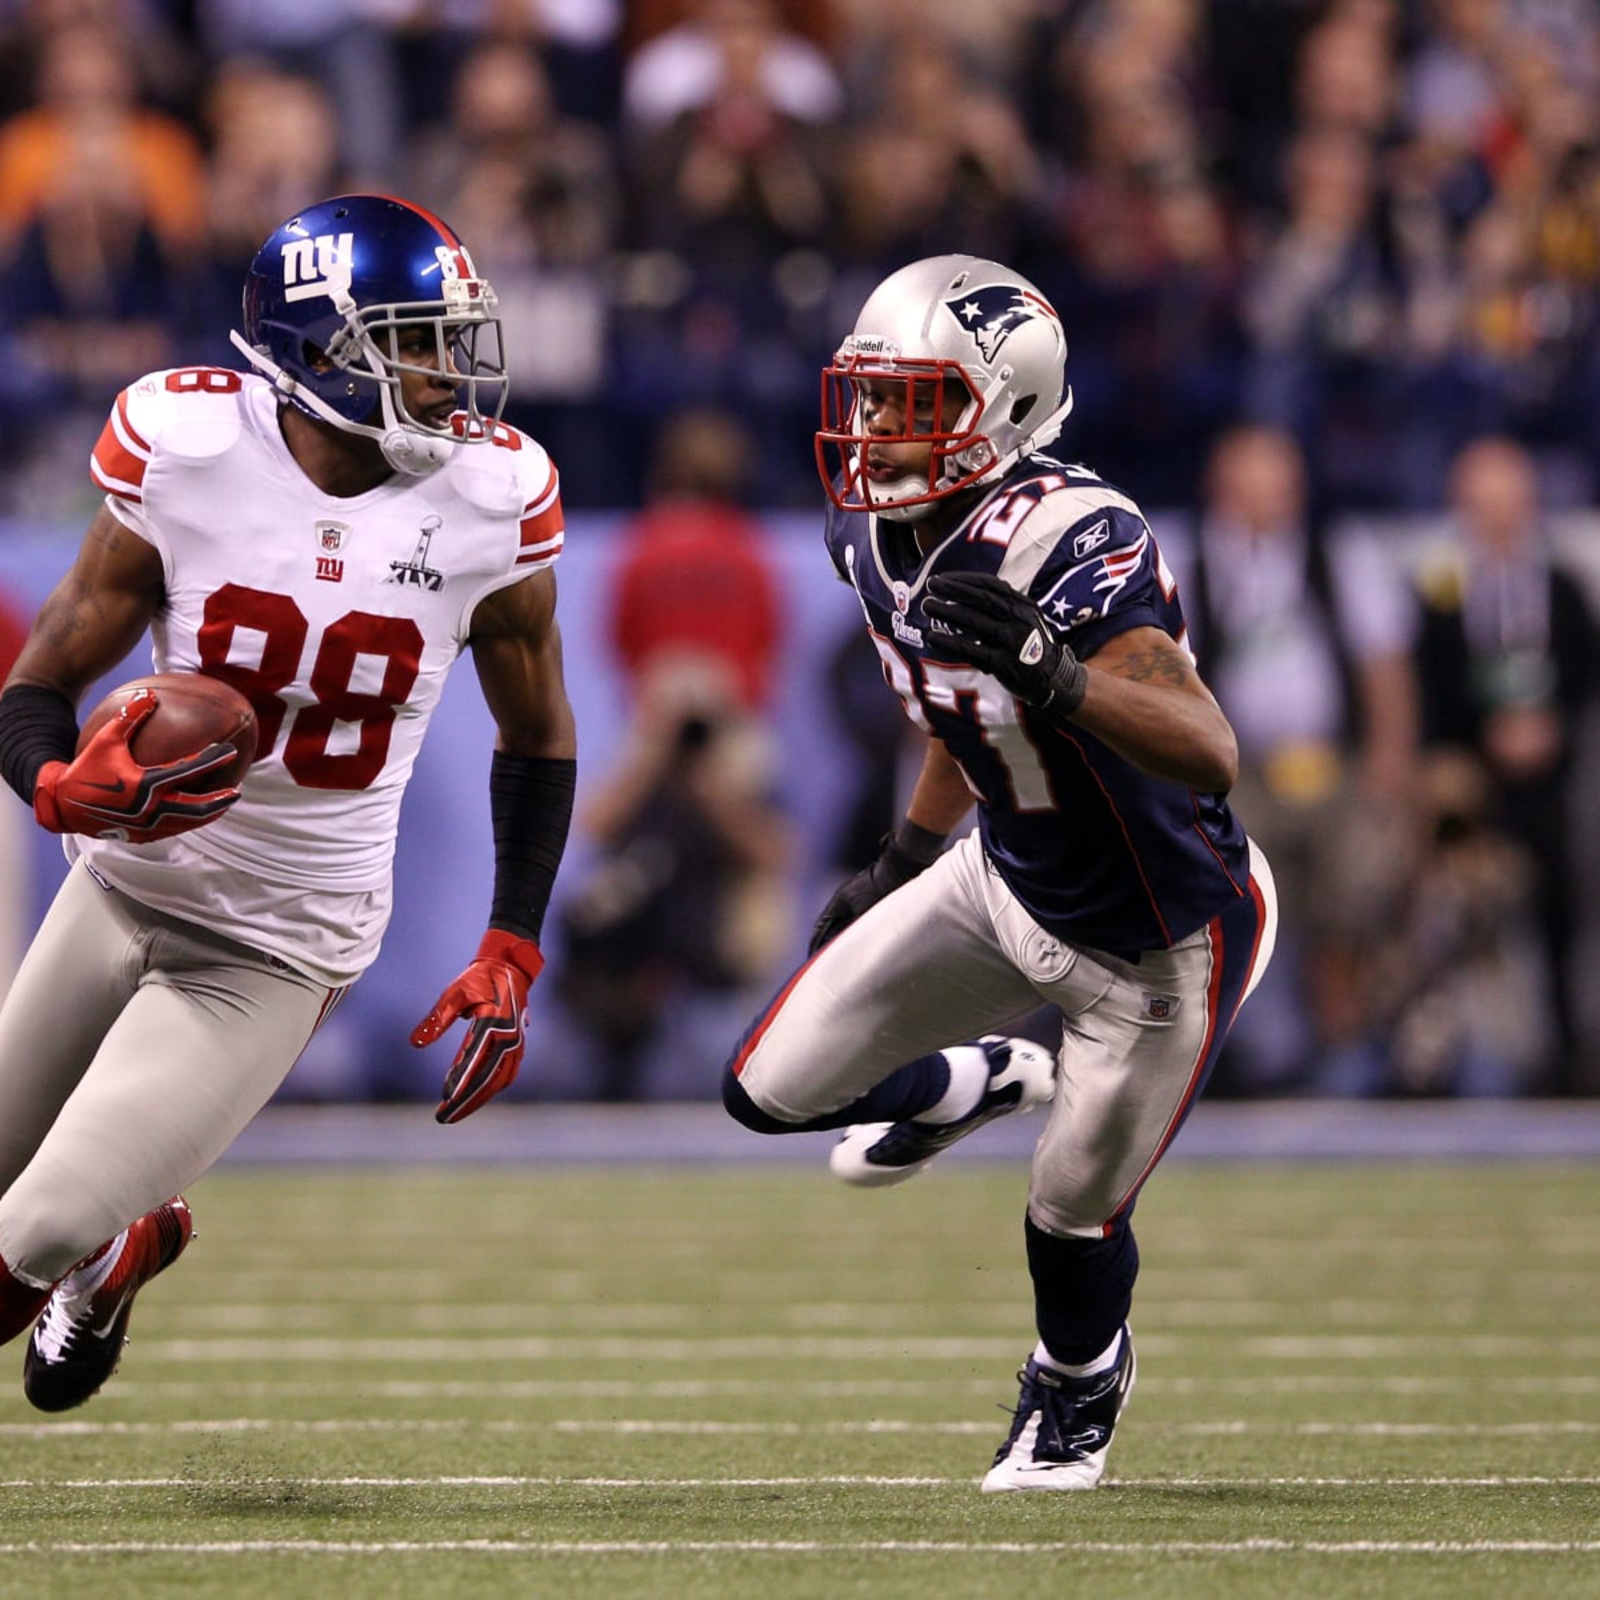 Fantasy Football Tuesday: Giants rookie WR Hakeem Nicks continues to score  – New York Daily News